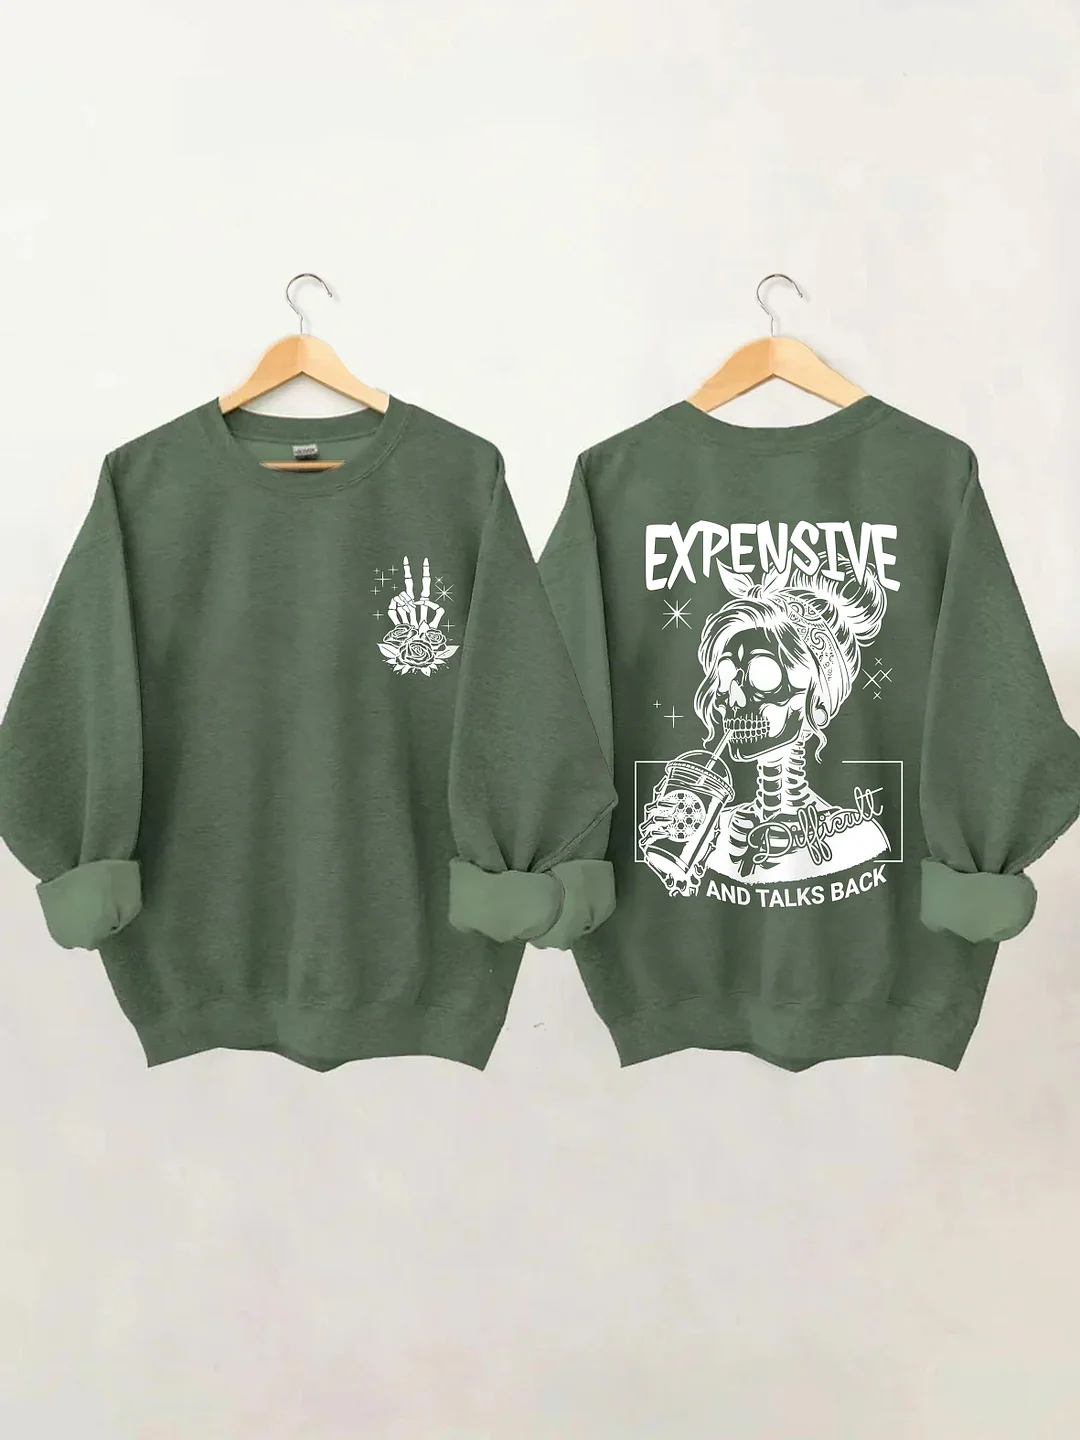 Expensive Difficult And Talks Back Sweatshirt 